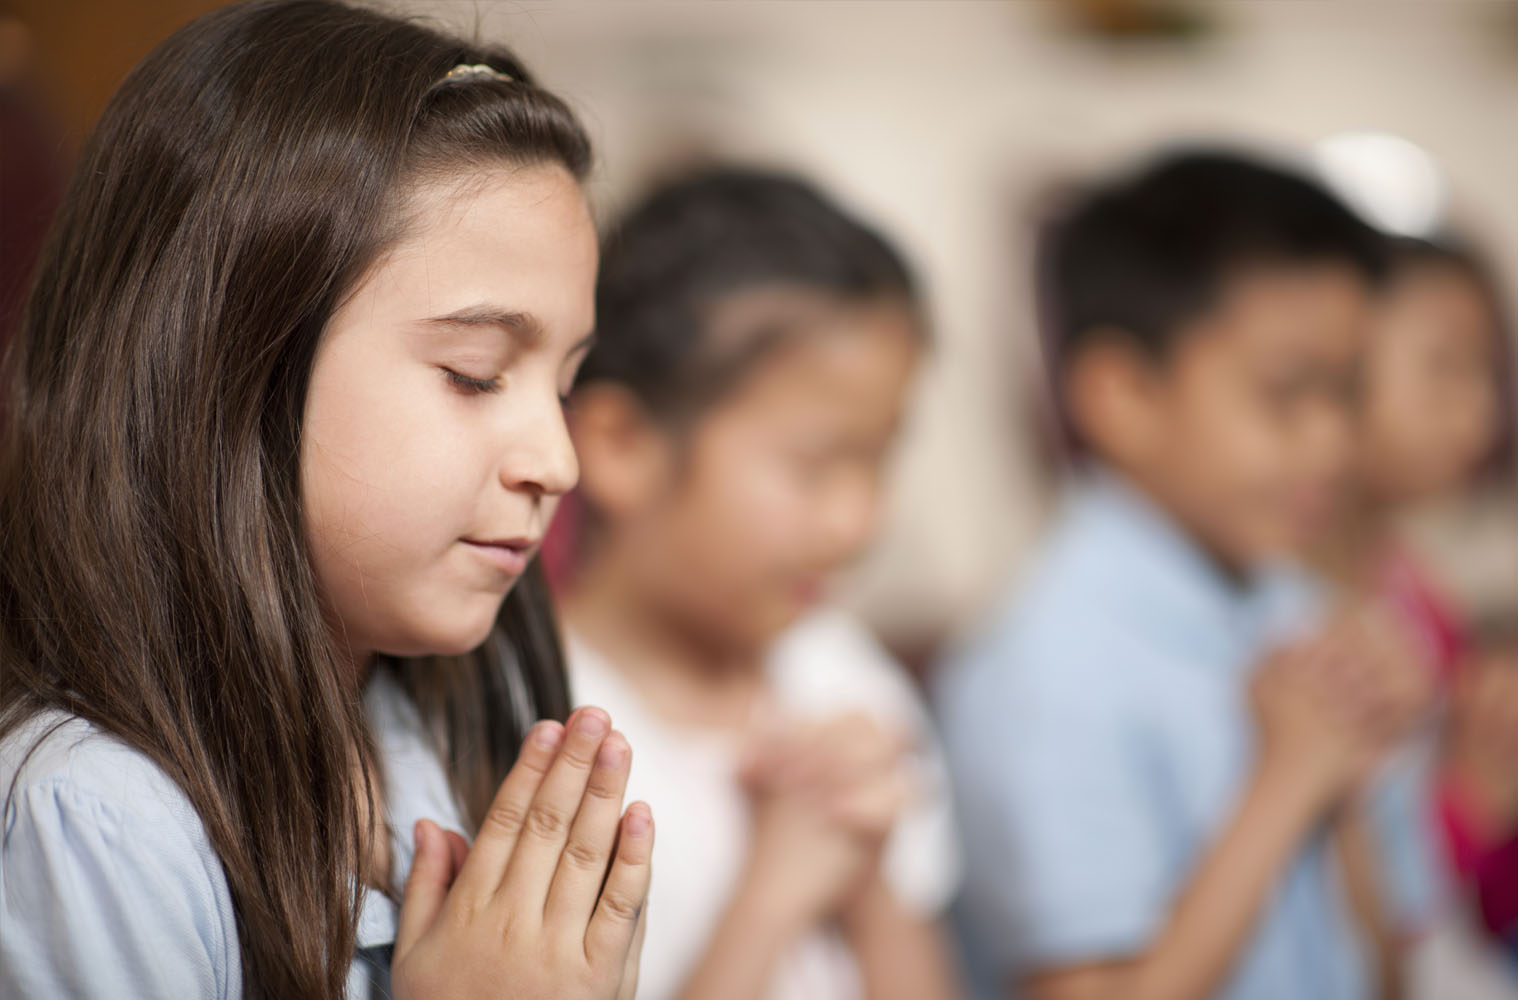 A young girl clasps her hands in prayer with her eyes closed.